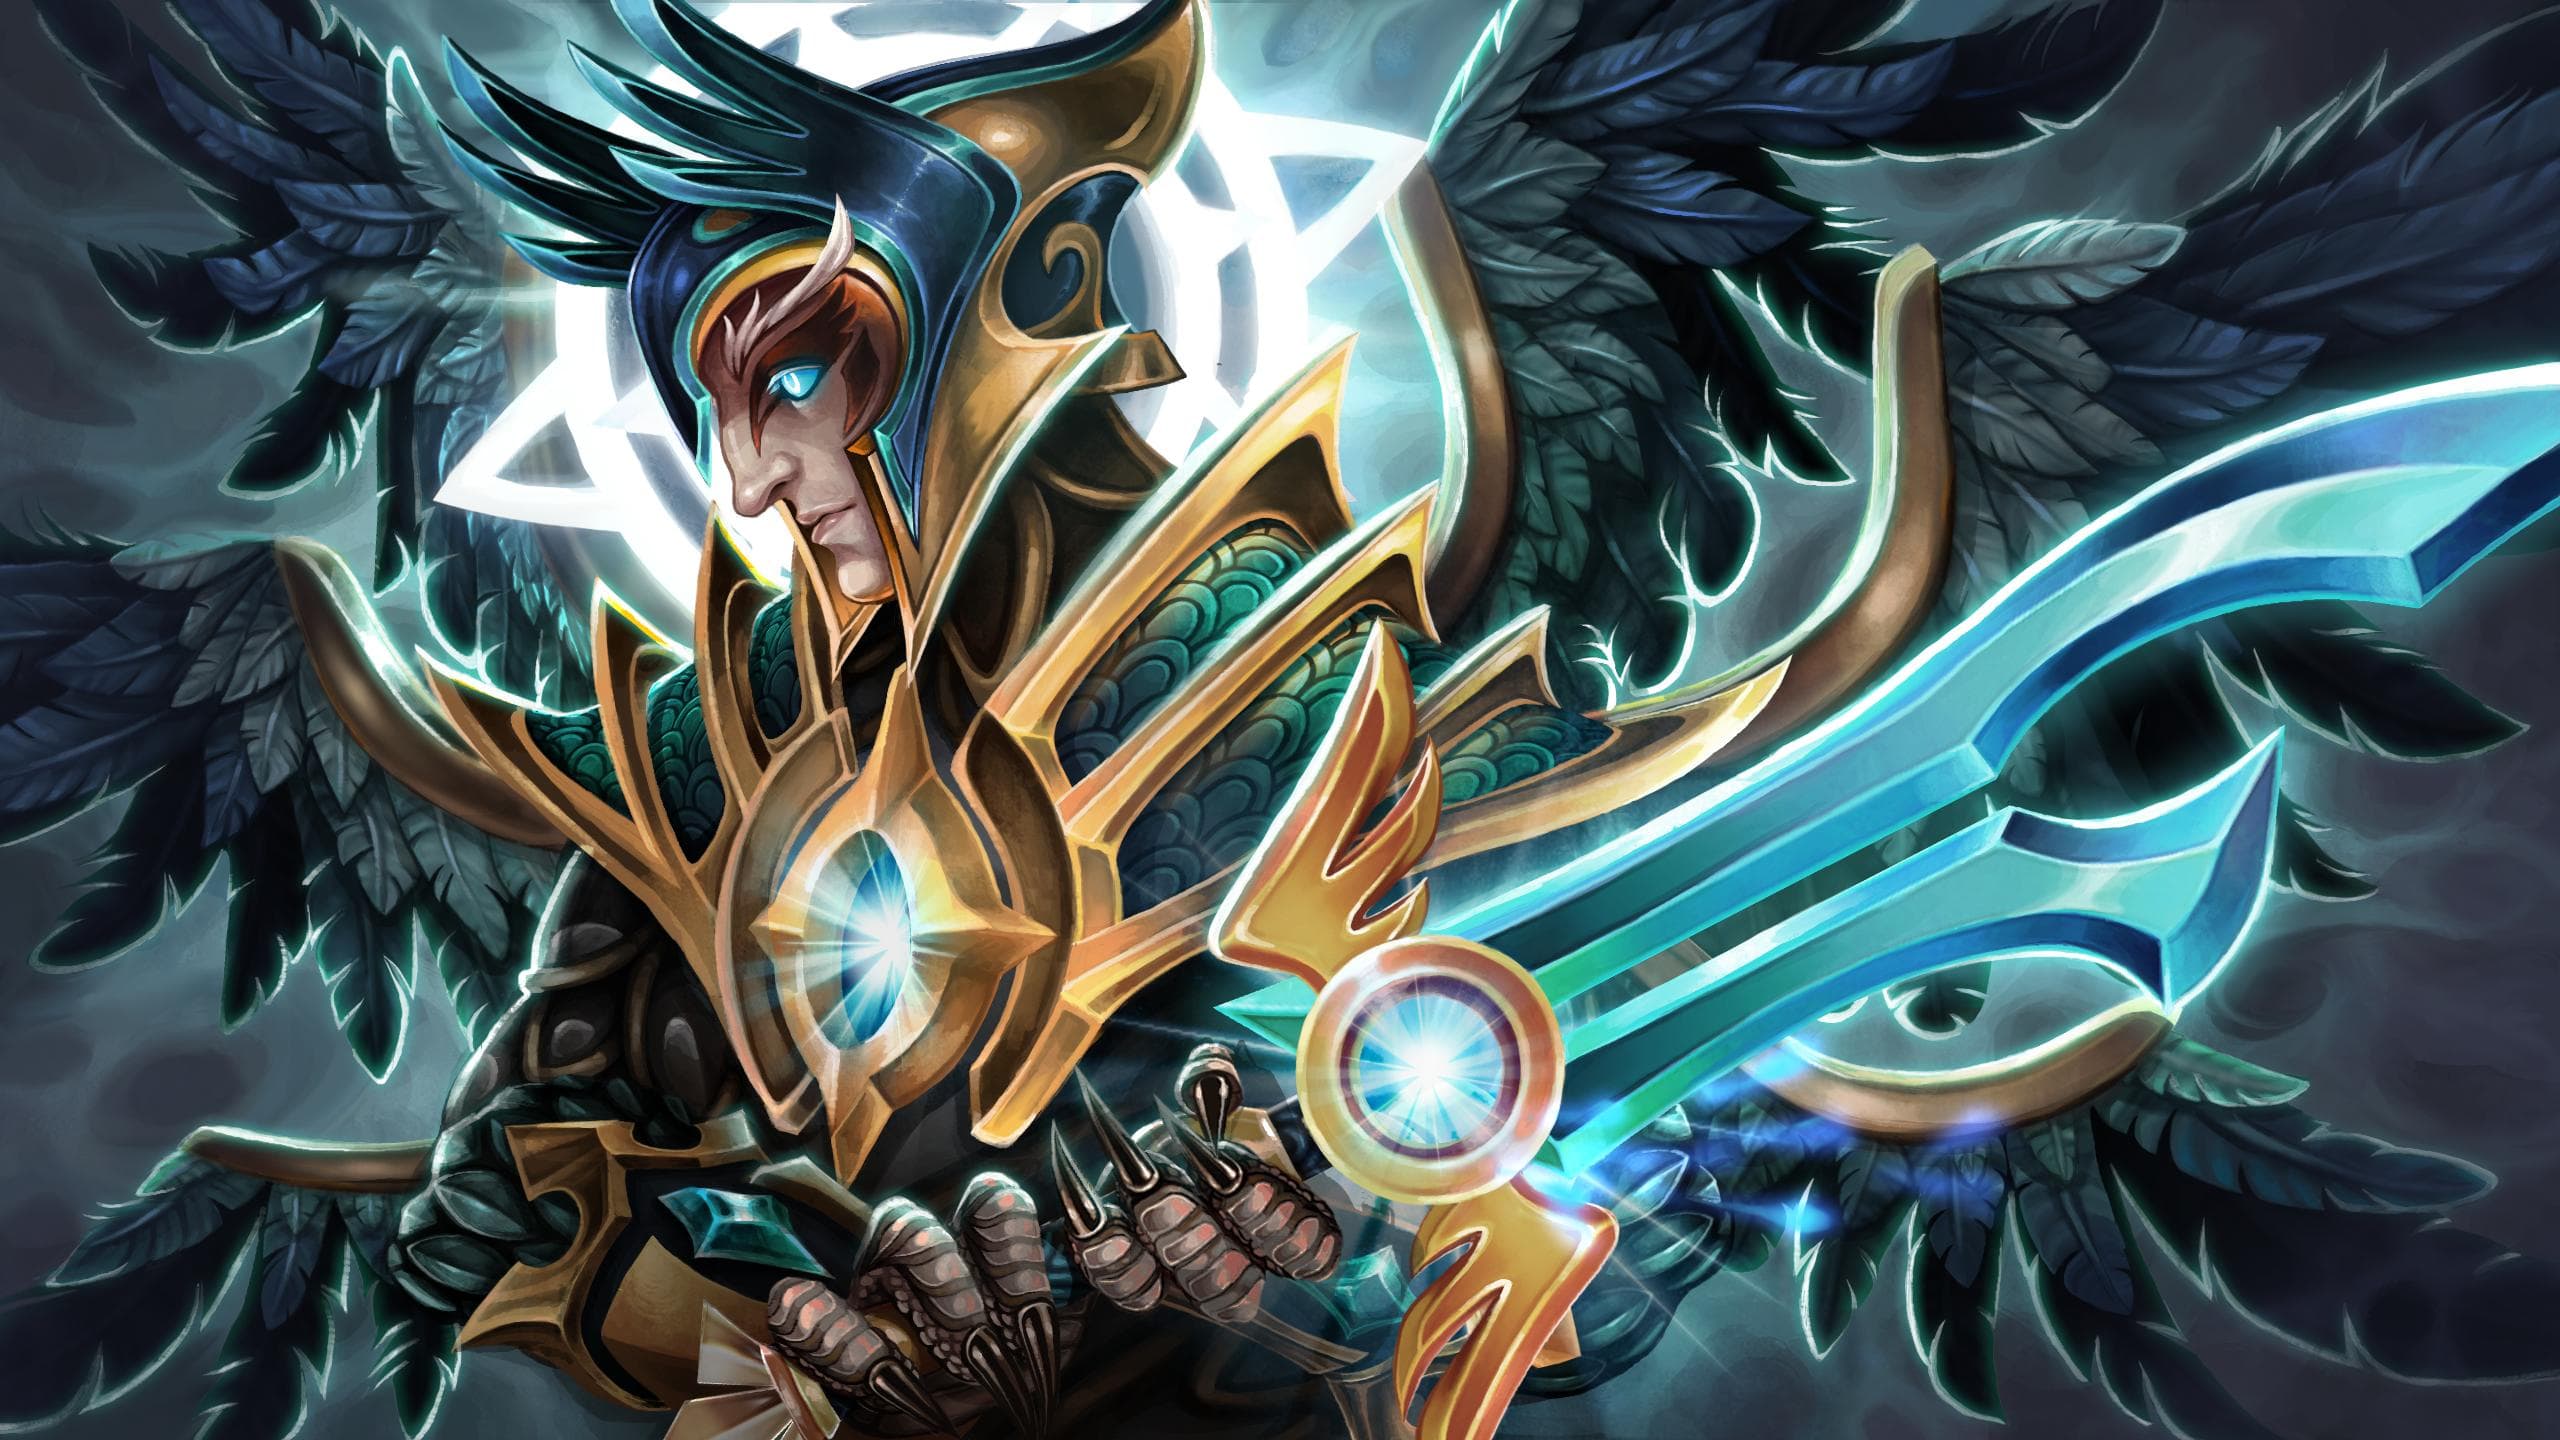 Dota 2 Heroes Skywrath Mage Abilities Mystic Flare Concussive Shot Ancient Seal Arcane Bolt Hd Wallpaper For Mobile Phones Tablet 2560x1440 Wallpapers13 Com